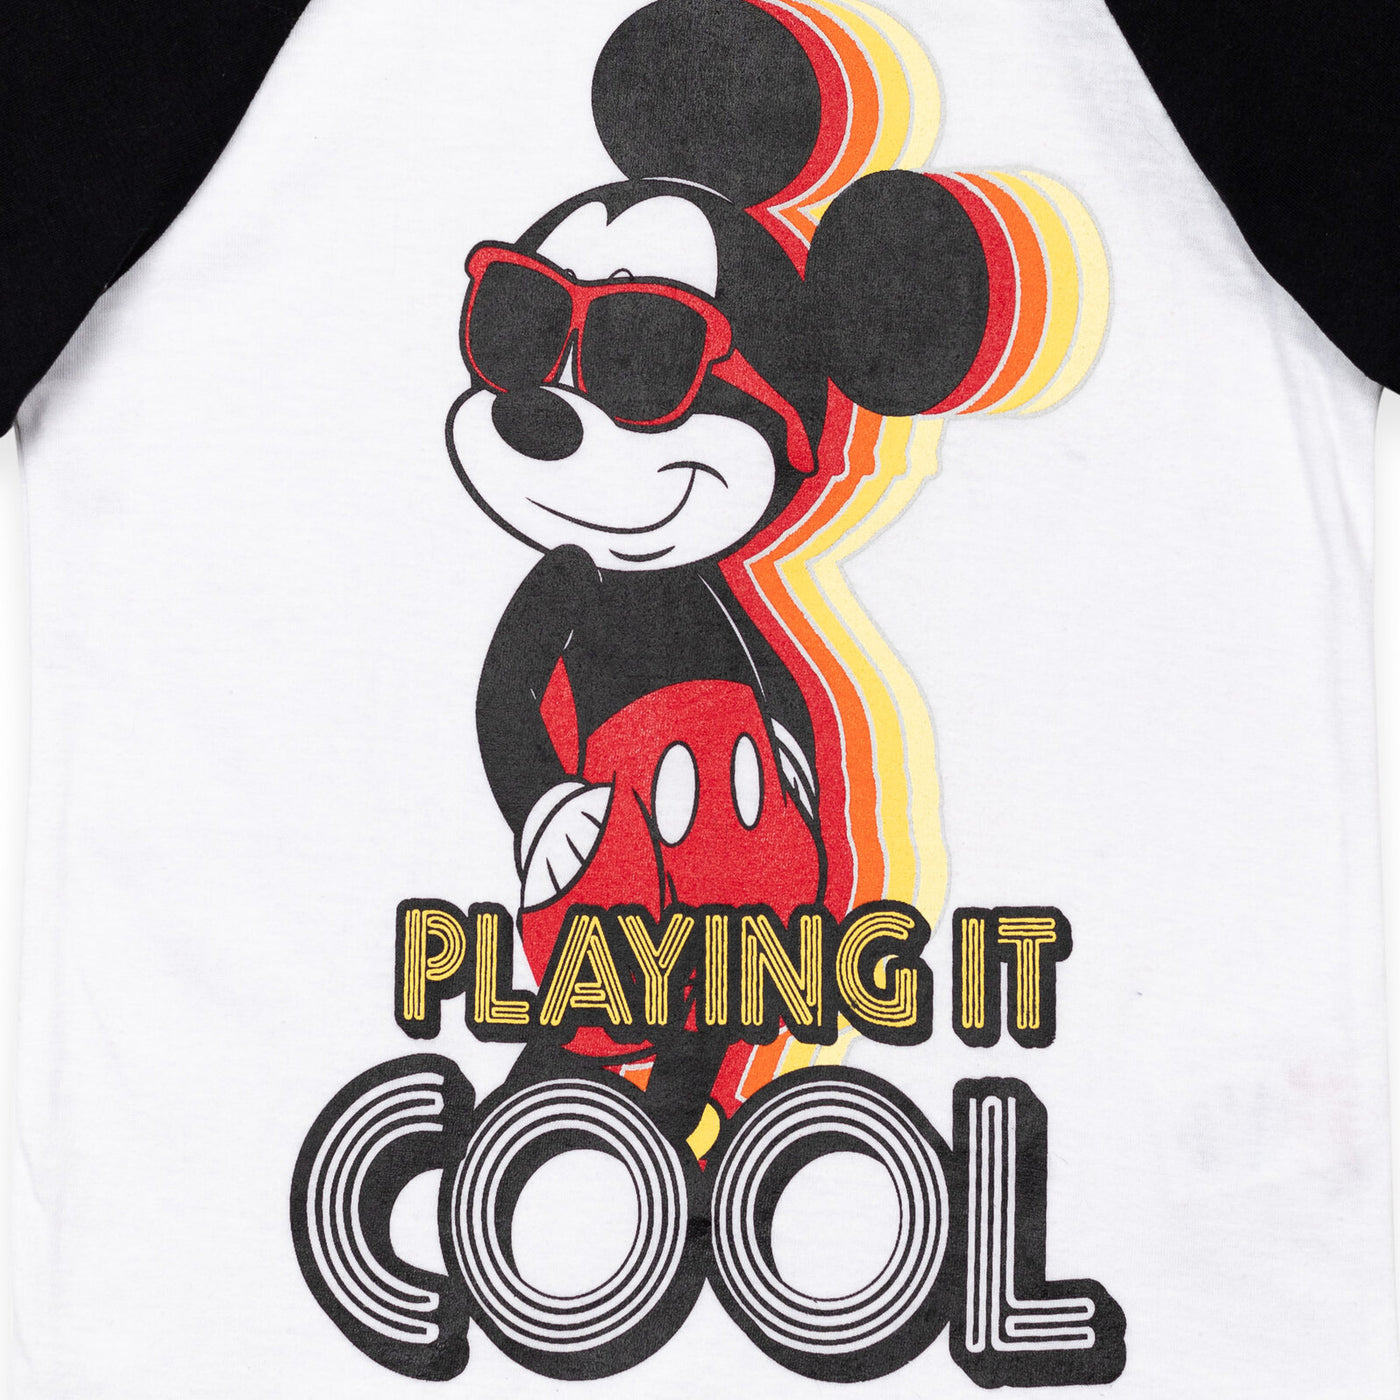 Disney Mickey Mouse T-Shirt and French Terry Shorts Outfit Set